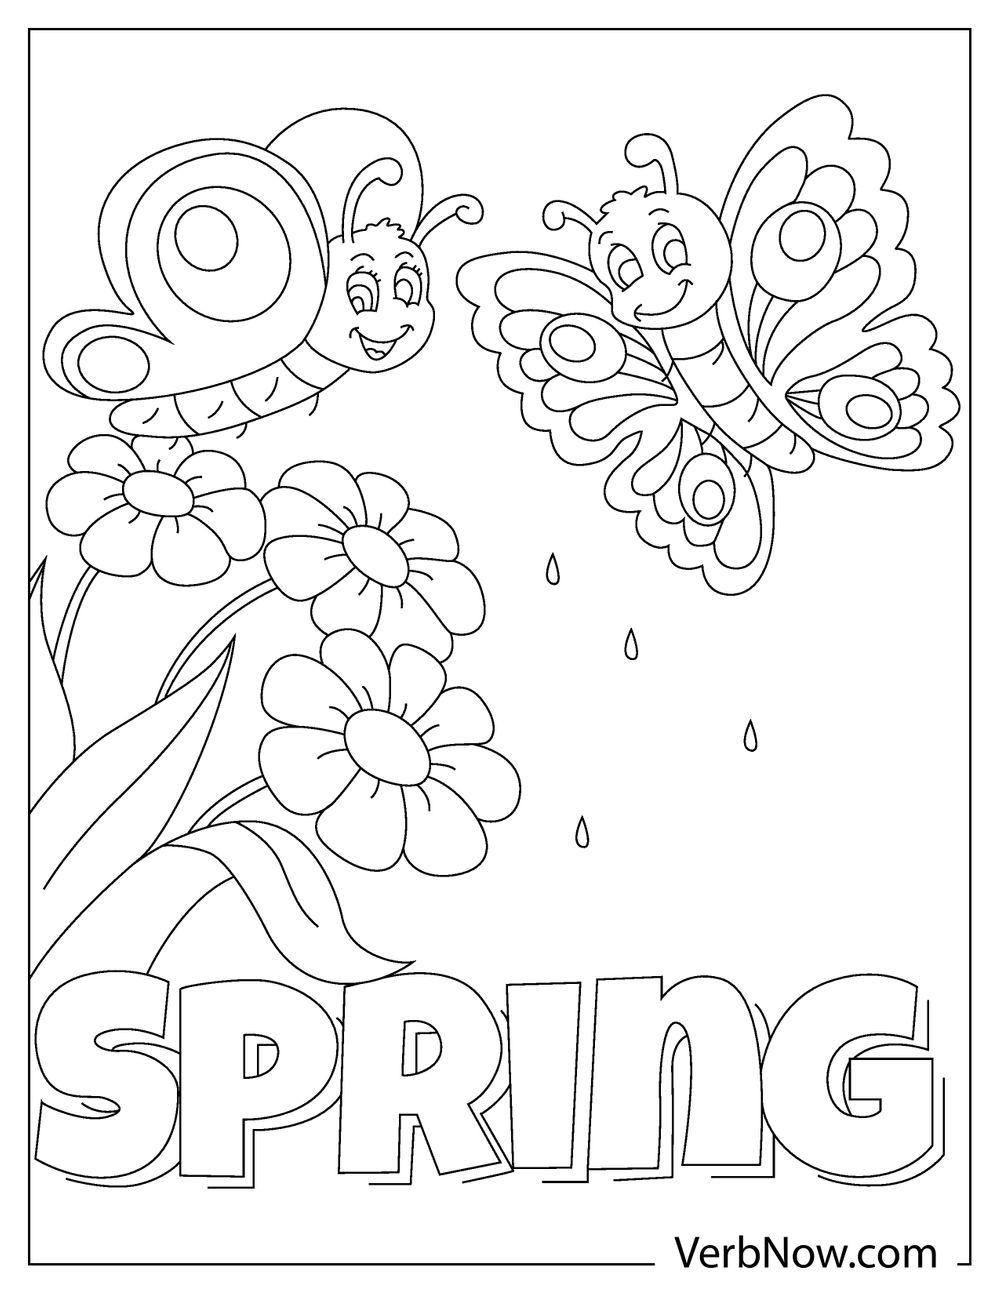 Free SPRING Coloring Pages & Book for Download (Printable PDF) - VerbNow